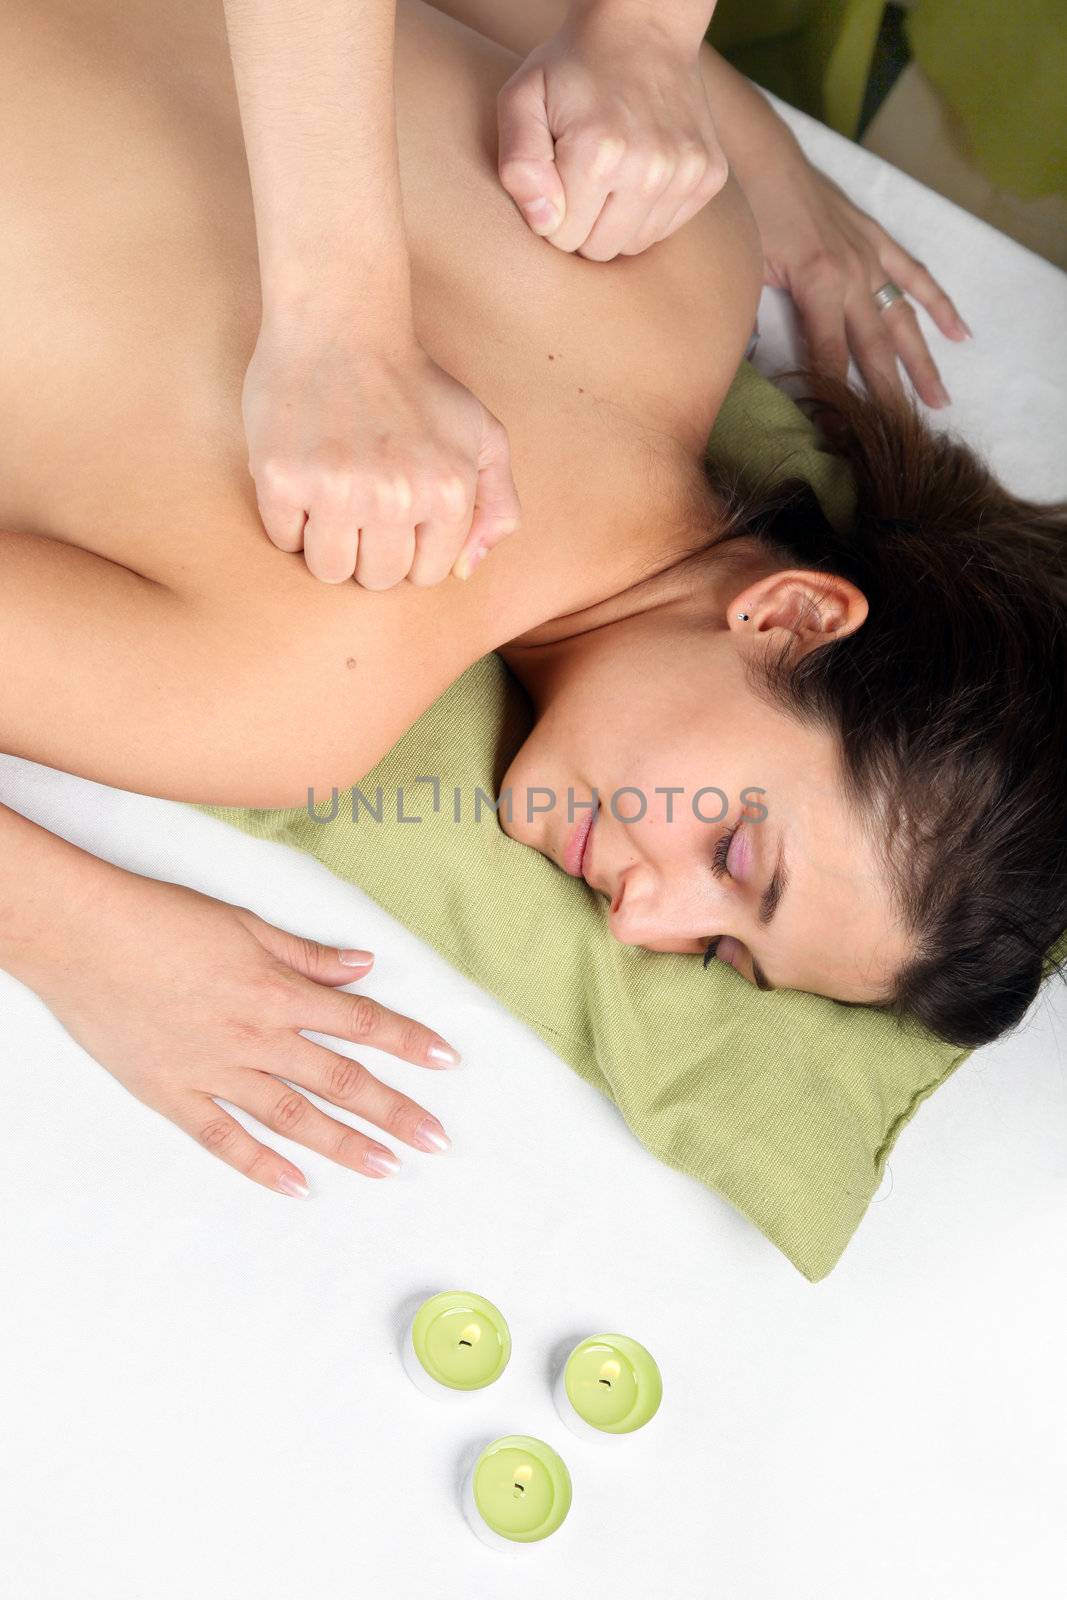 A young woman receives a massage.  by Farina6000